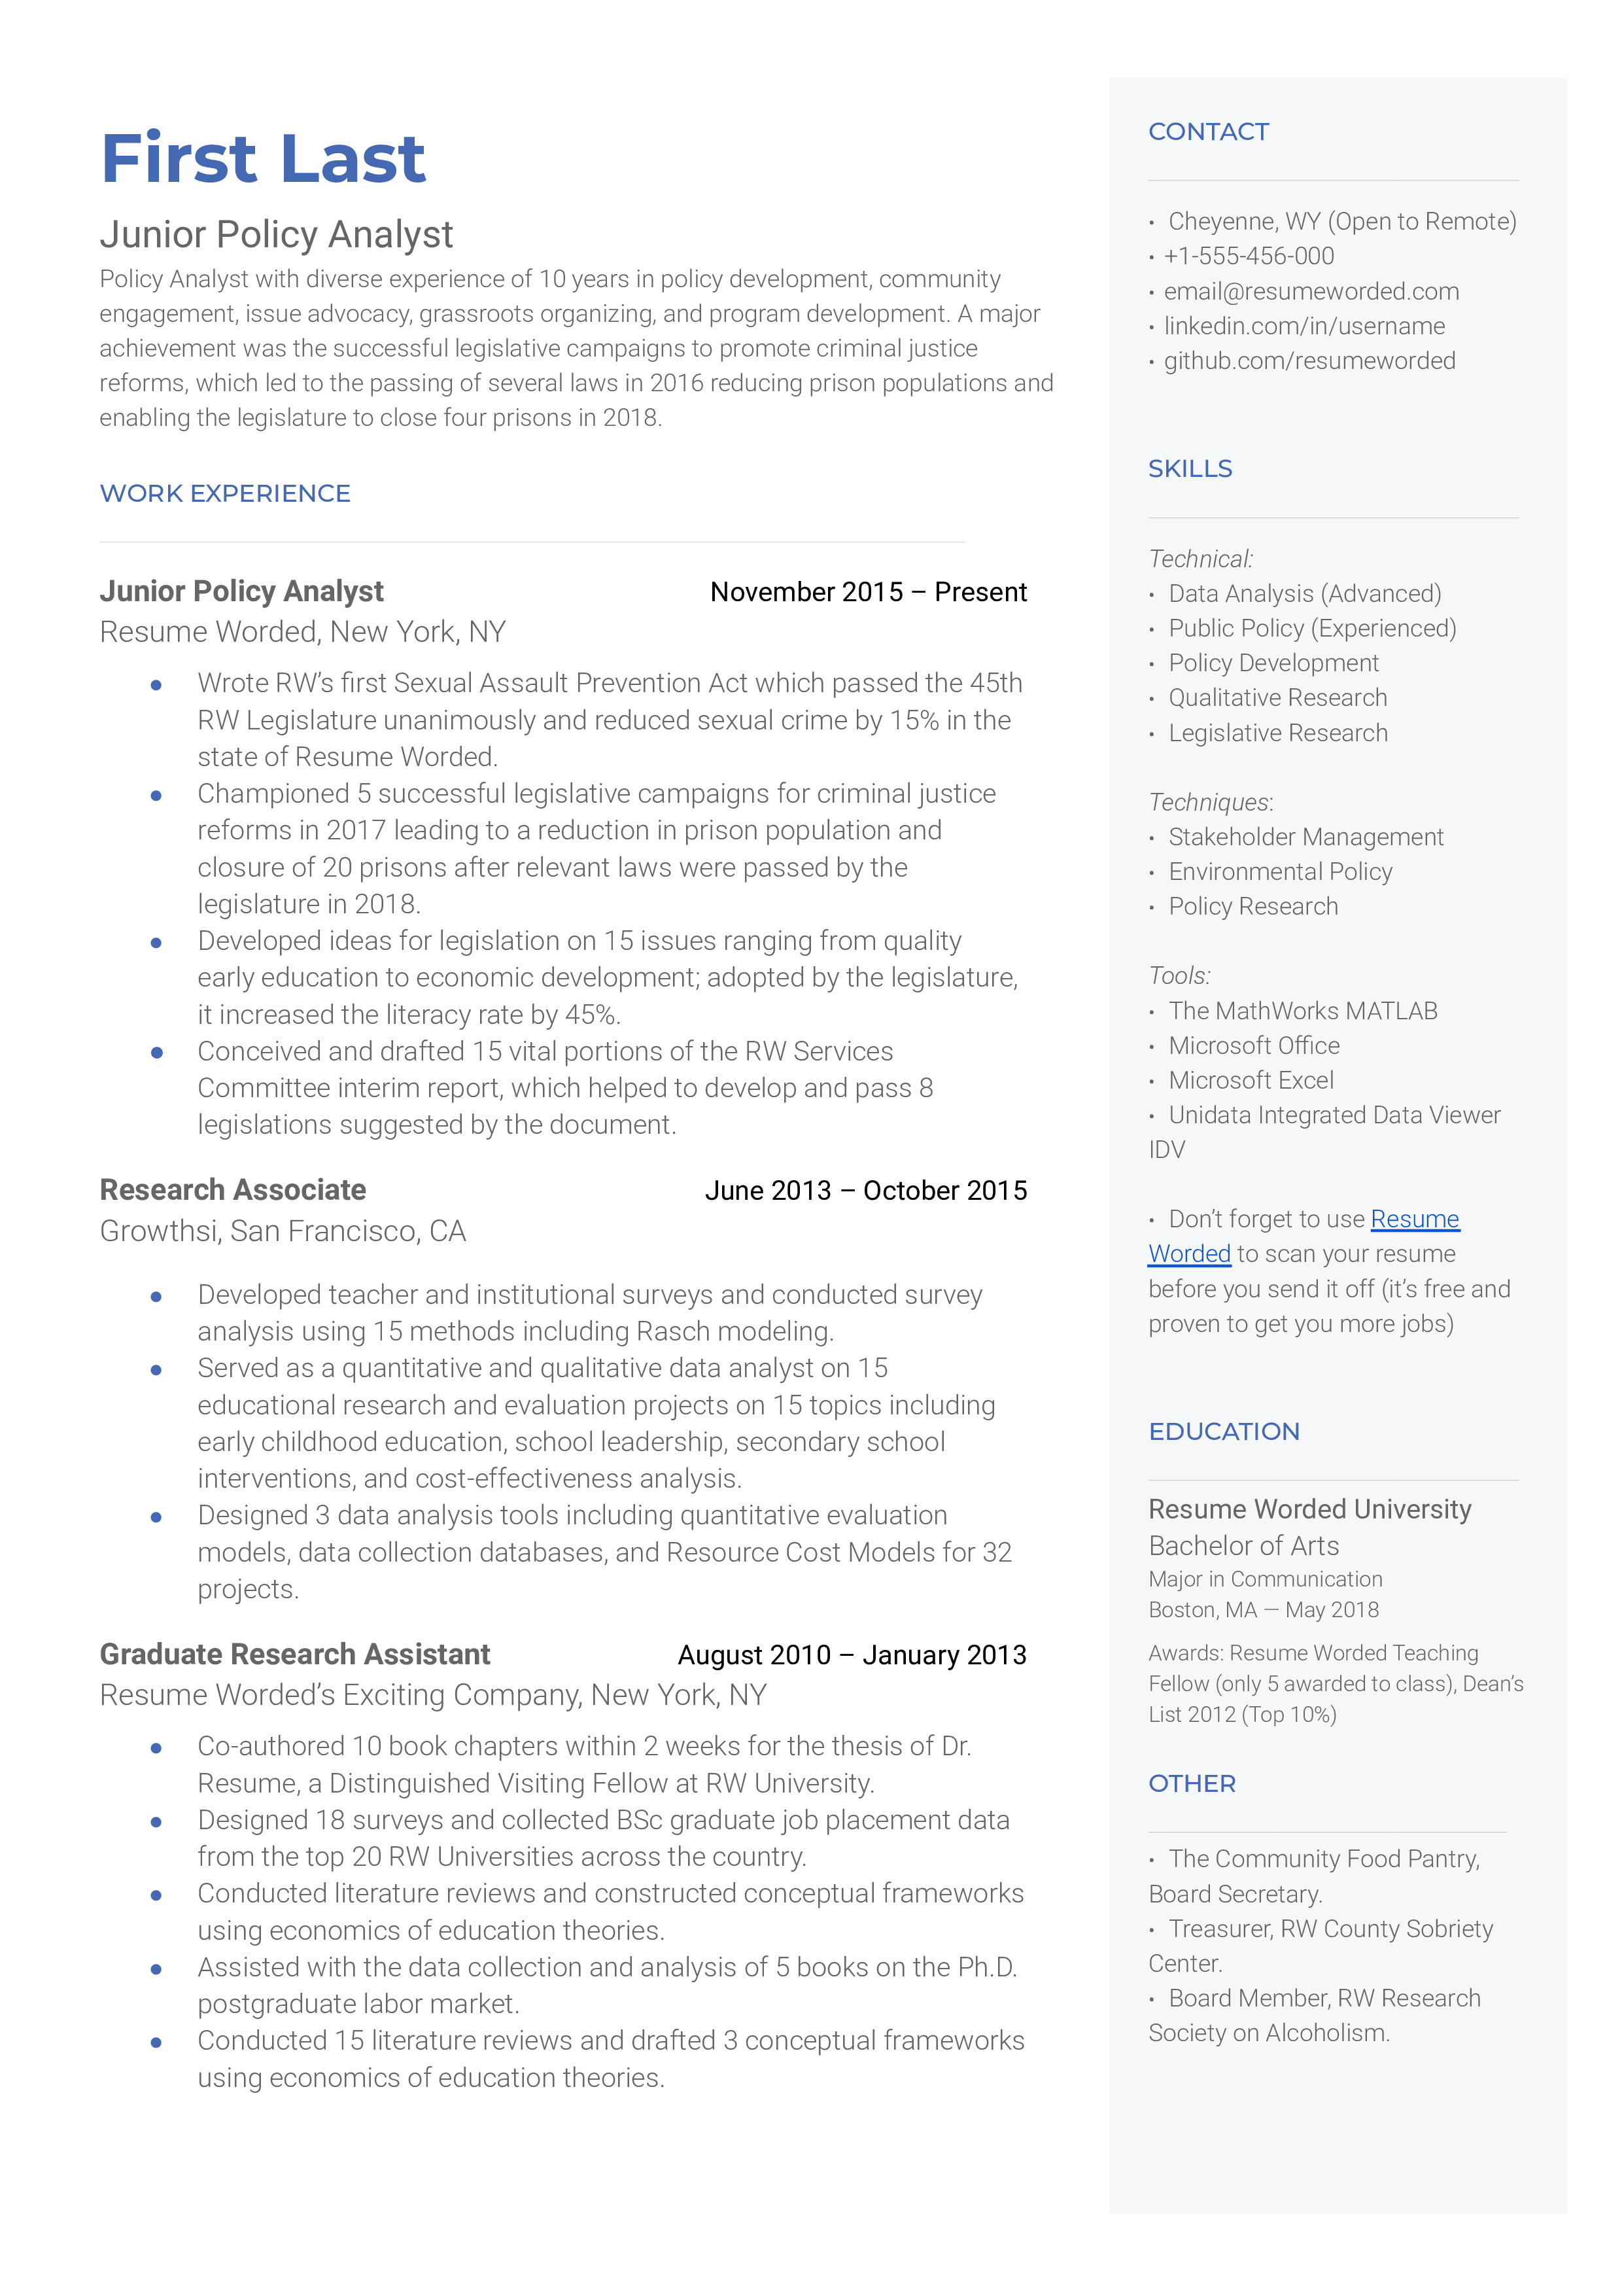 Junior Policy Analyst Resume Template + Example